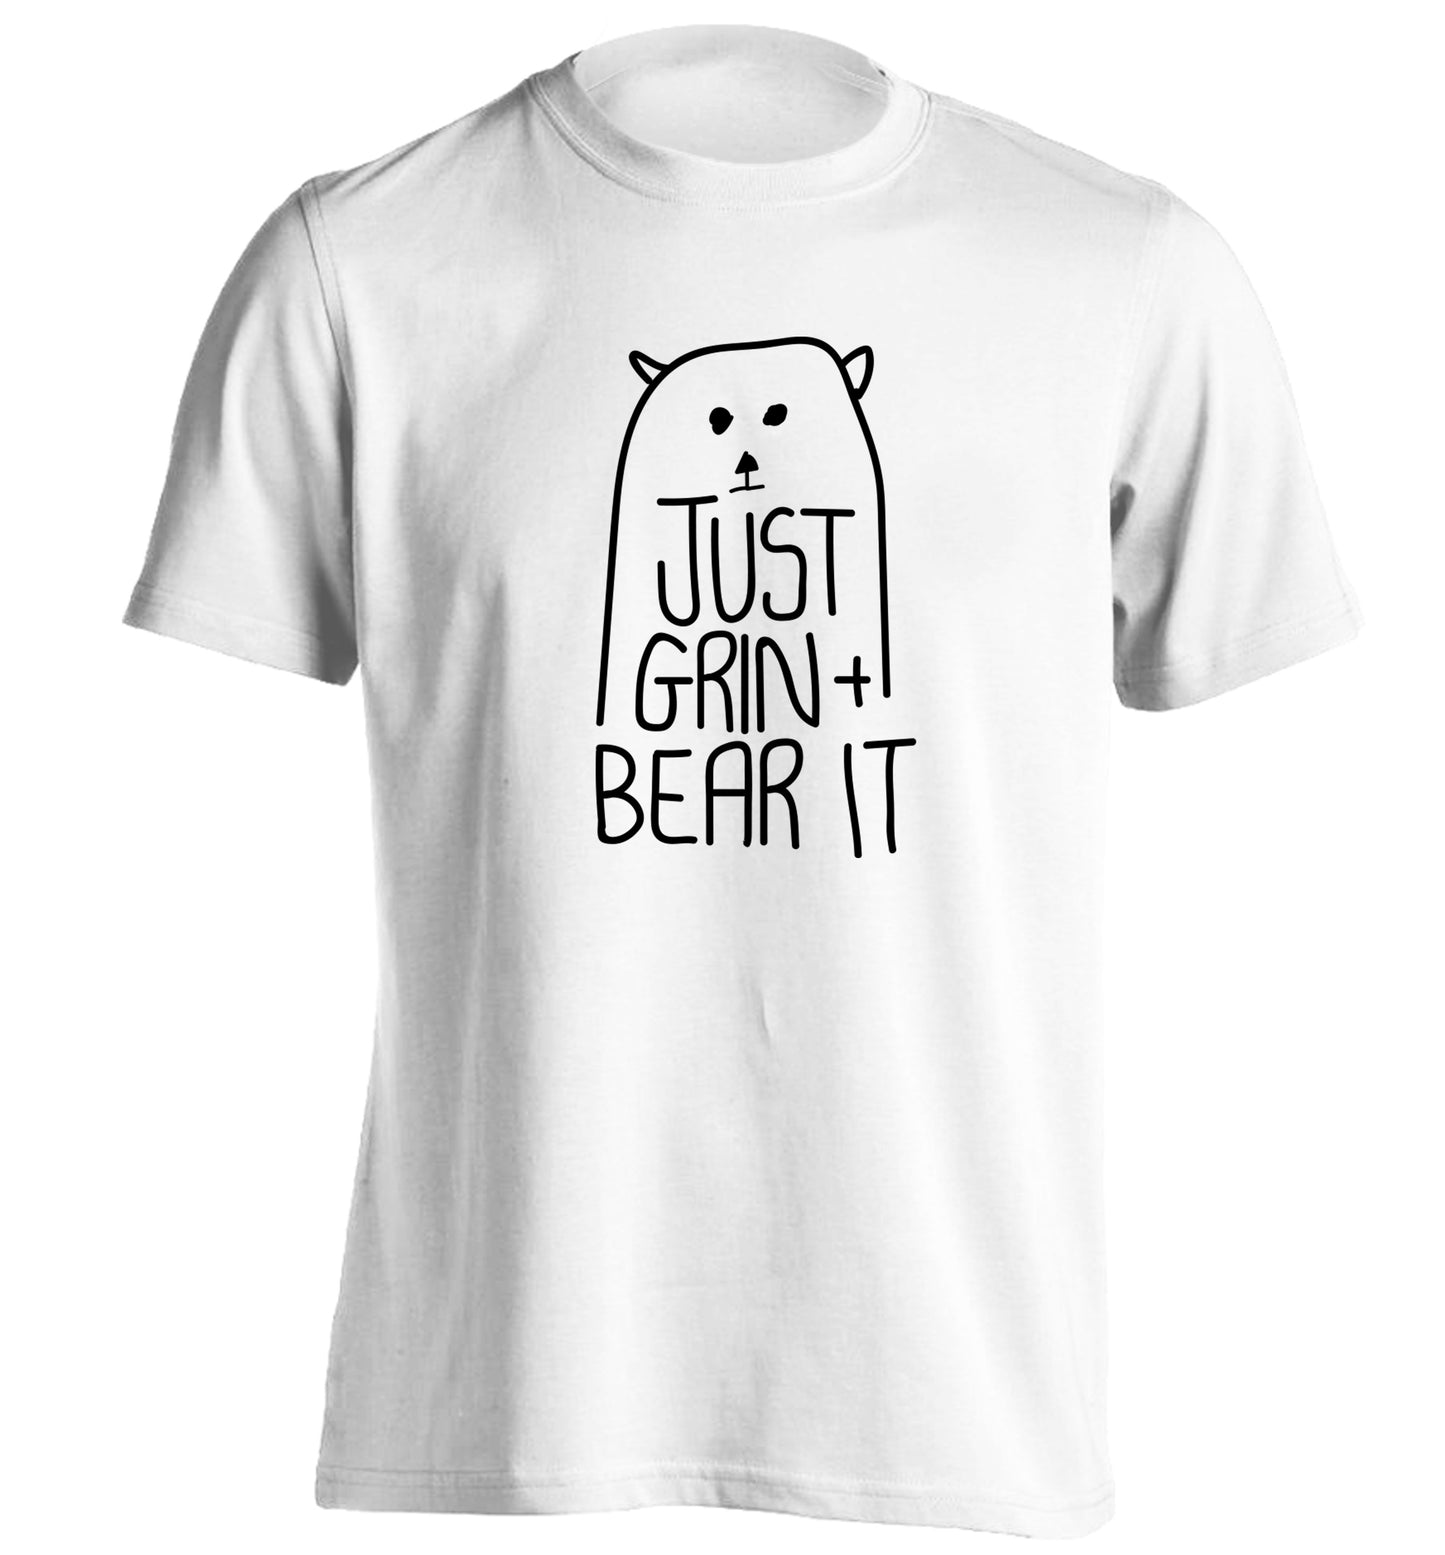 Just grin and bear it adults unisex white Tshirt 2XL